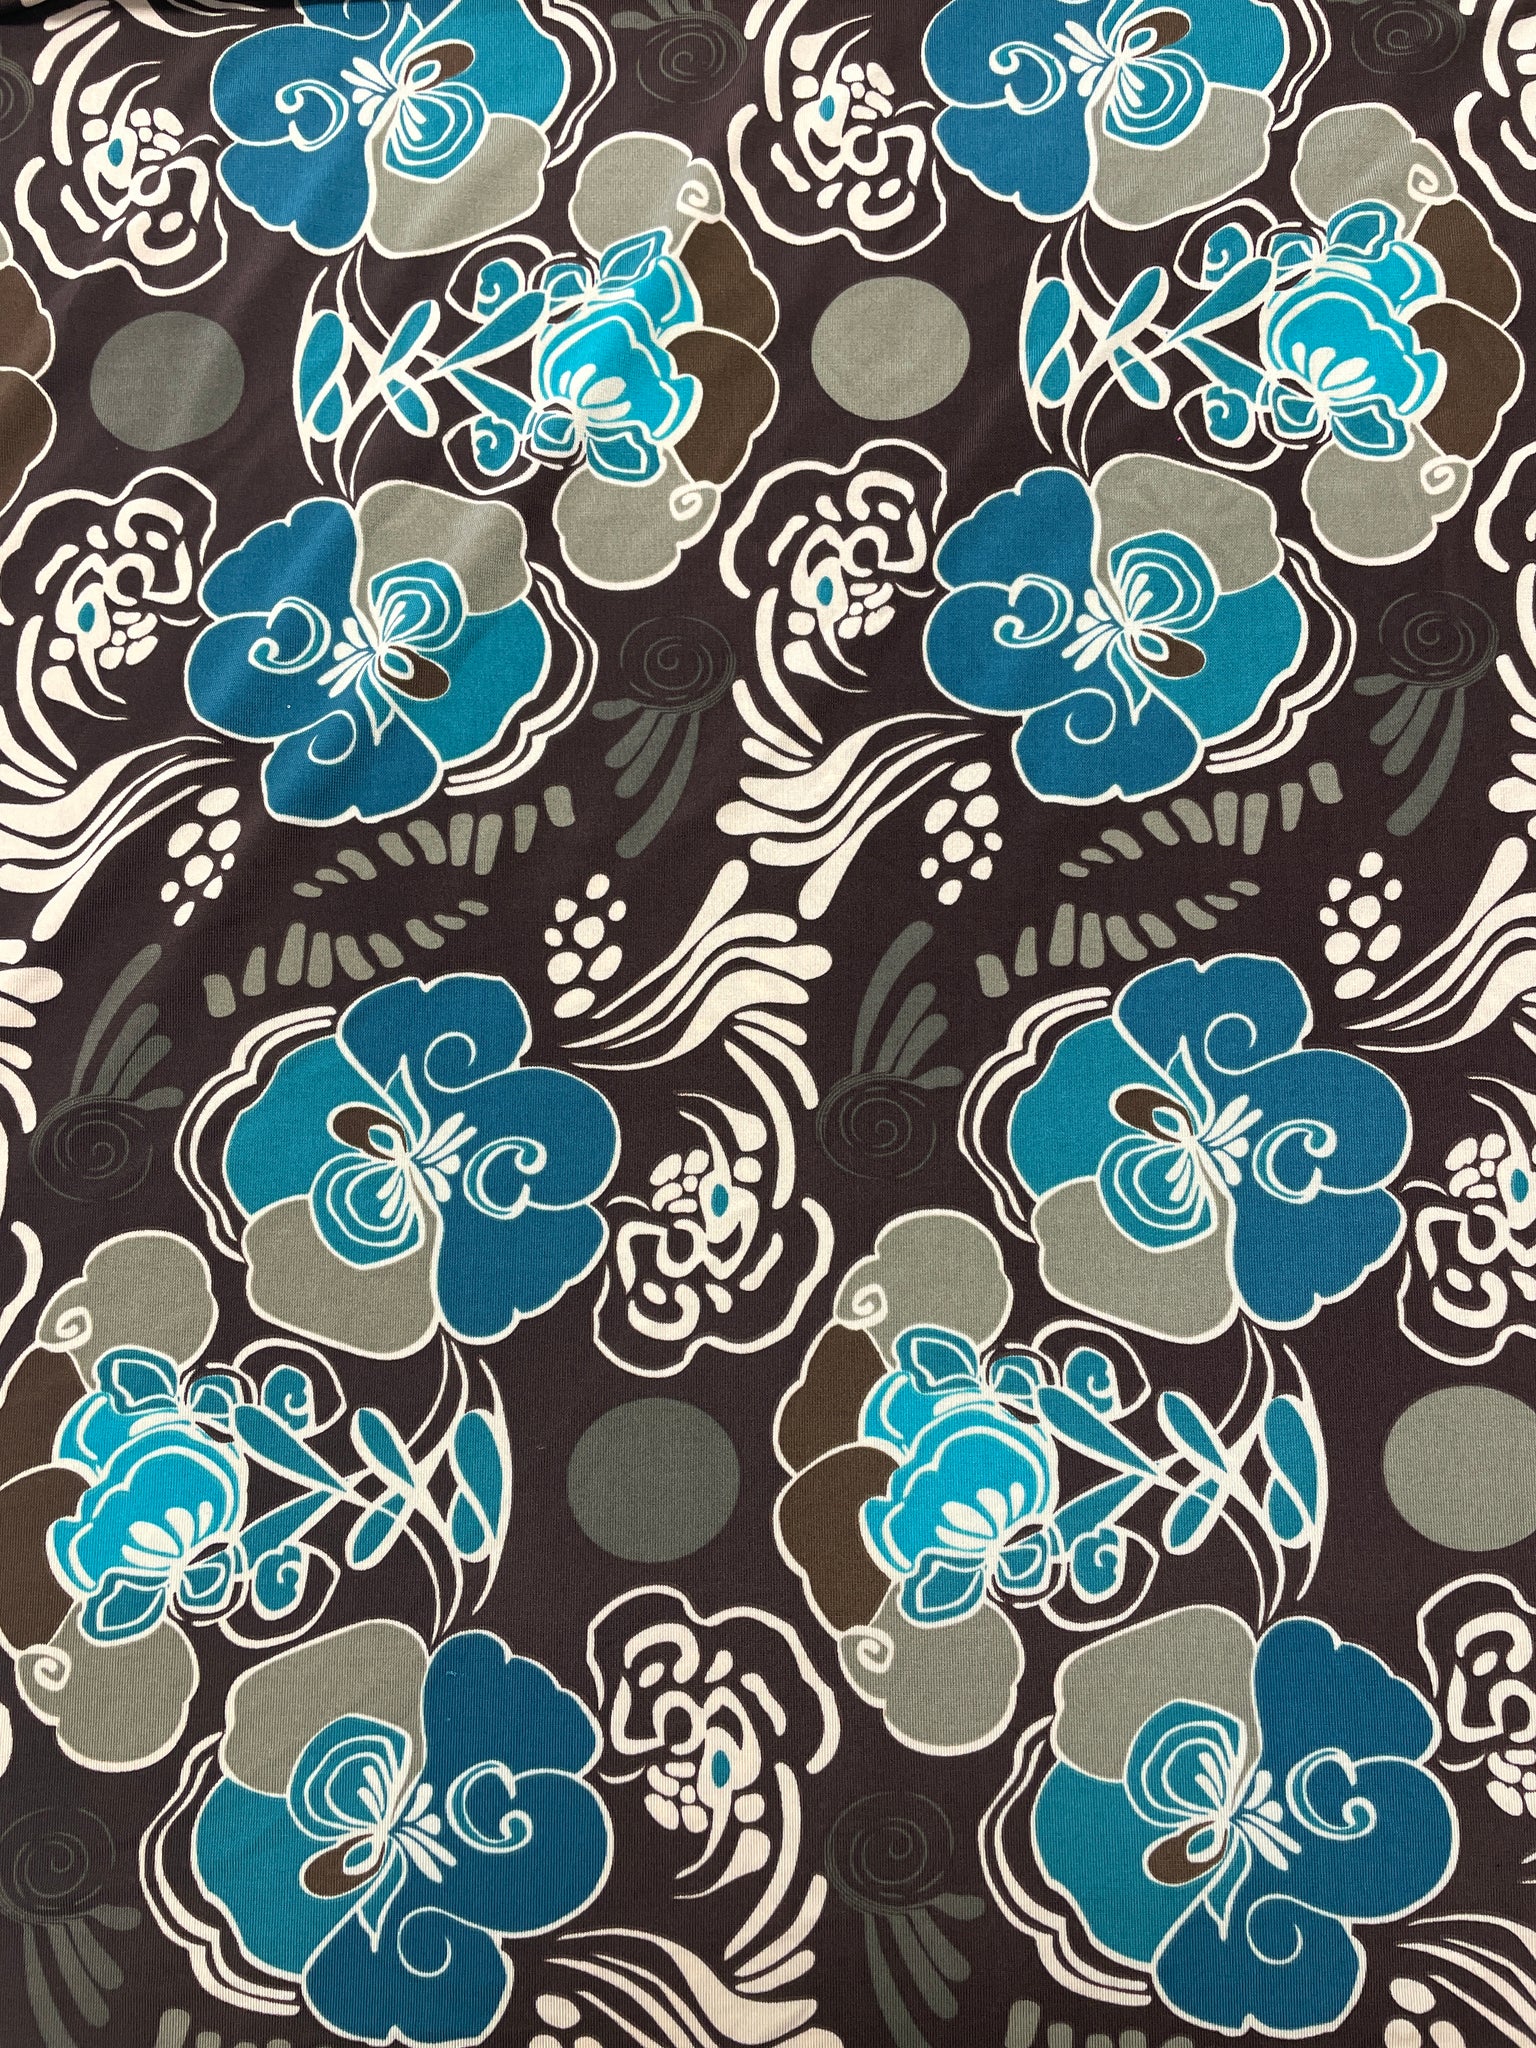 2 7/8 YD Polyester Blend Knit - Dark Brown with Turquoise Flowers